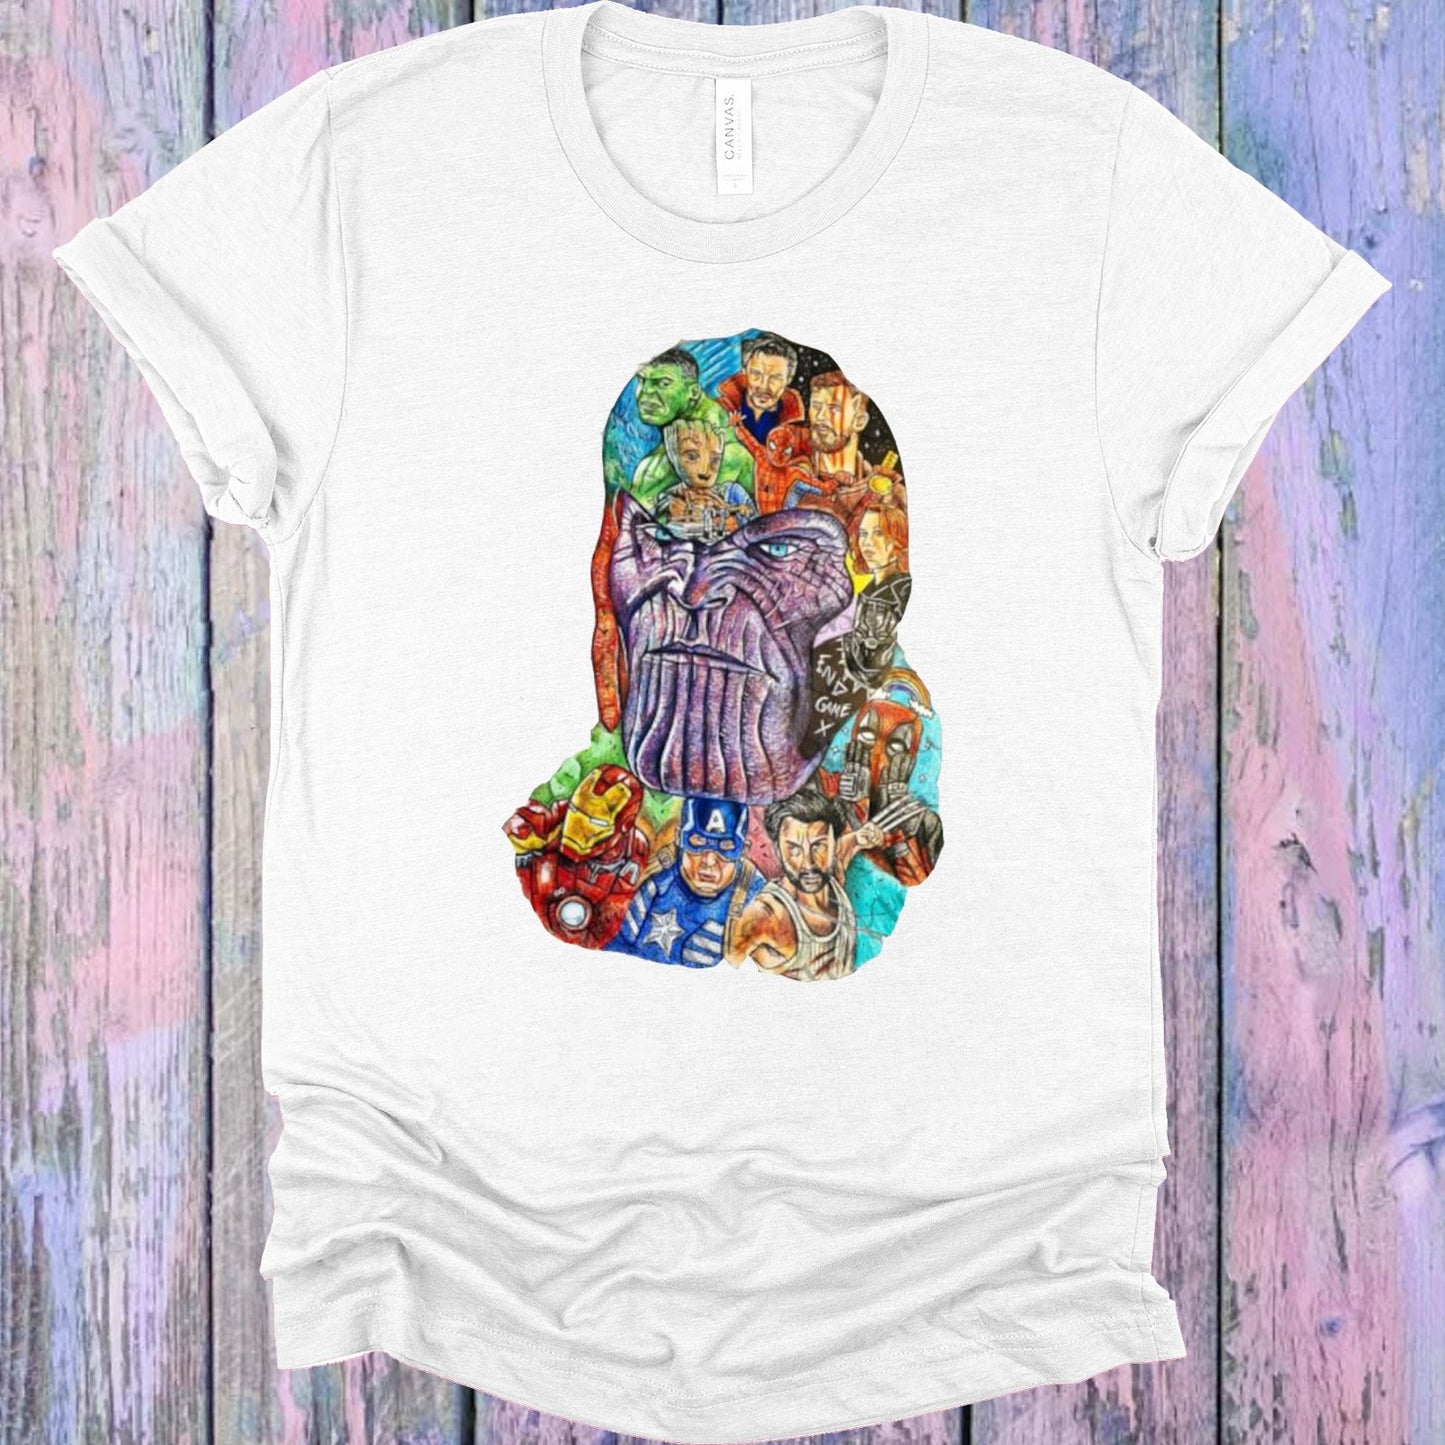 Marvel Collage Graphic Tee Graphic Tee